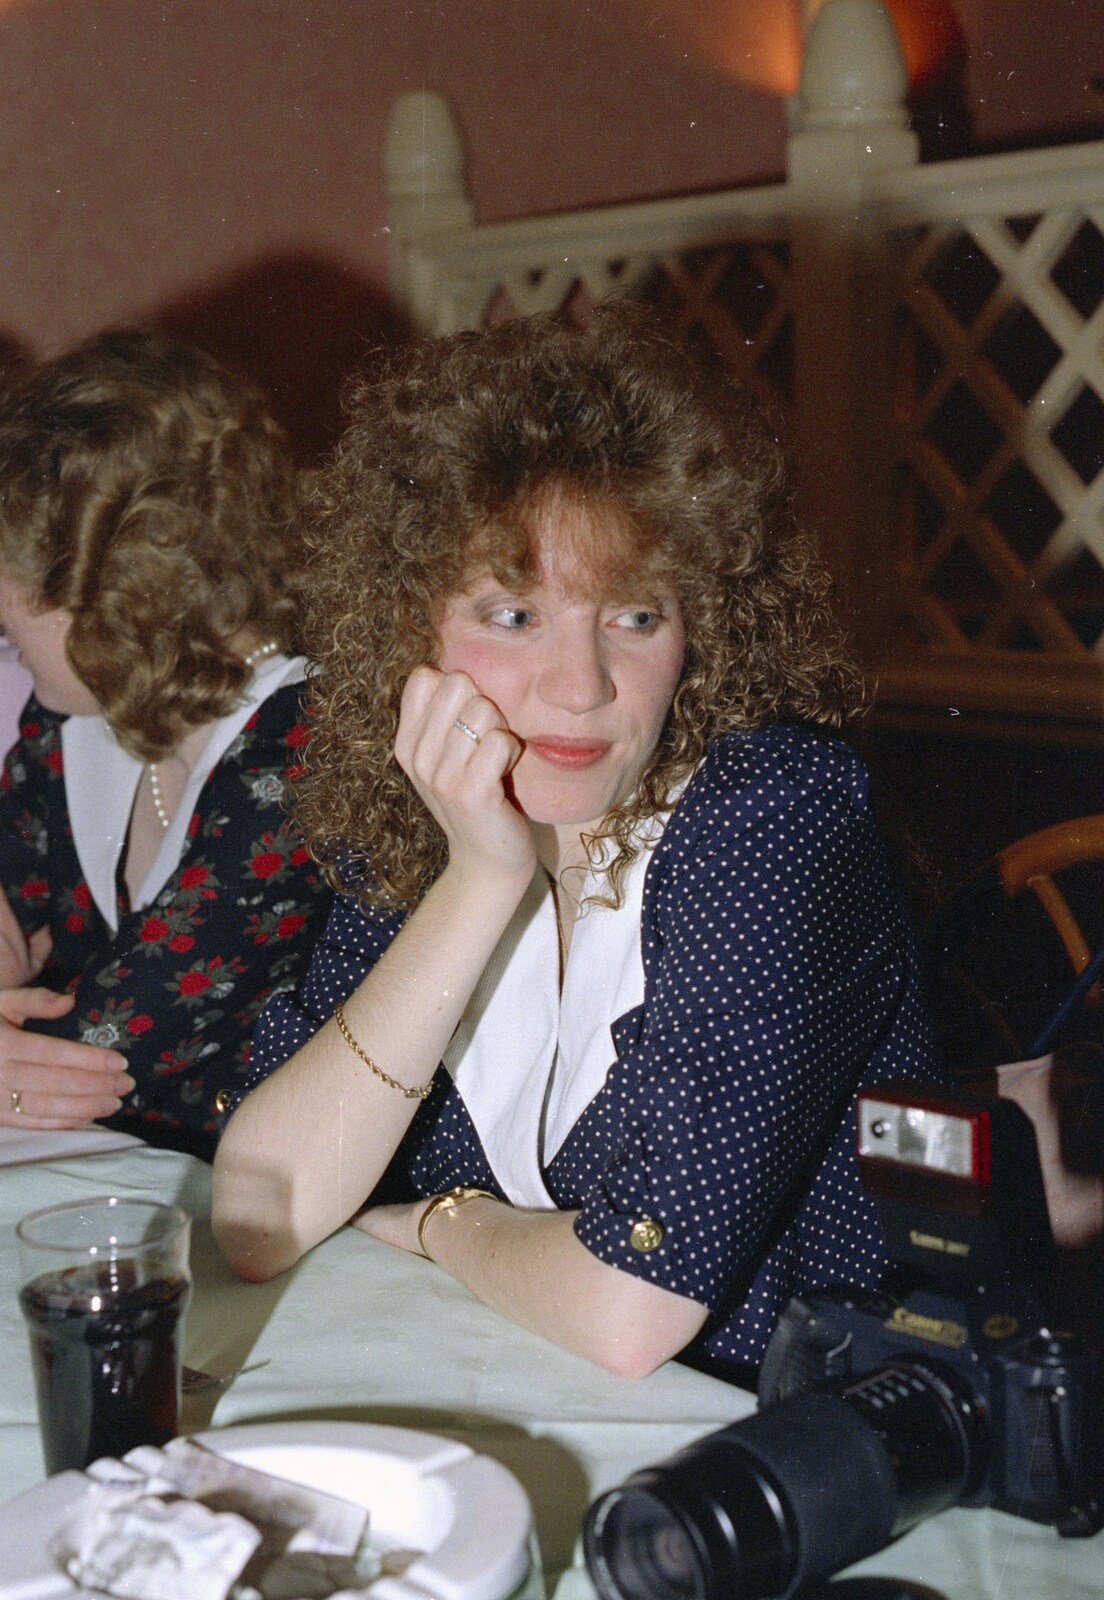 Monique from Printec at the Park Hotel, Diss, Norfolk - 14th January 1992